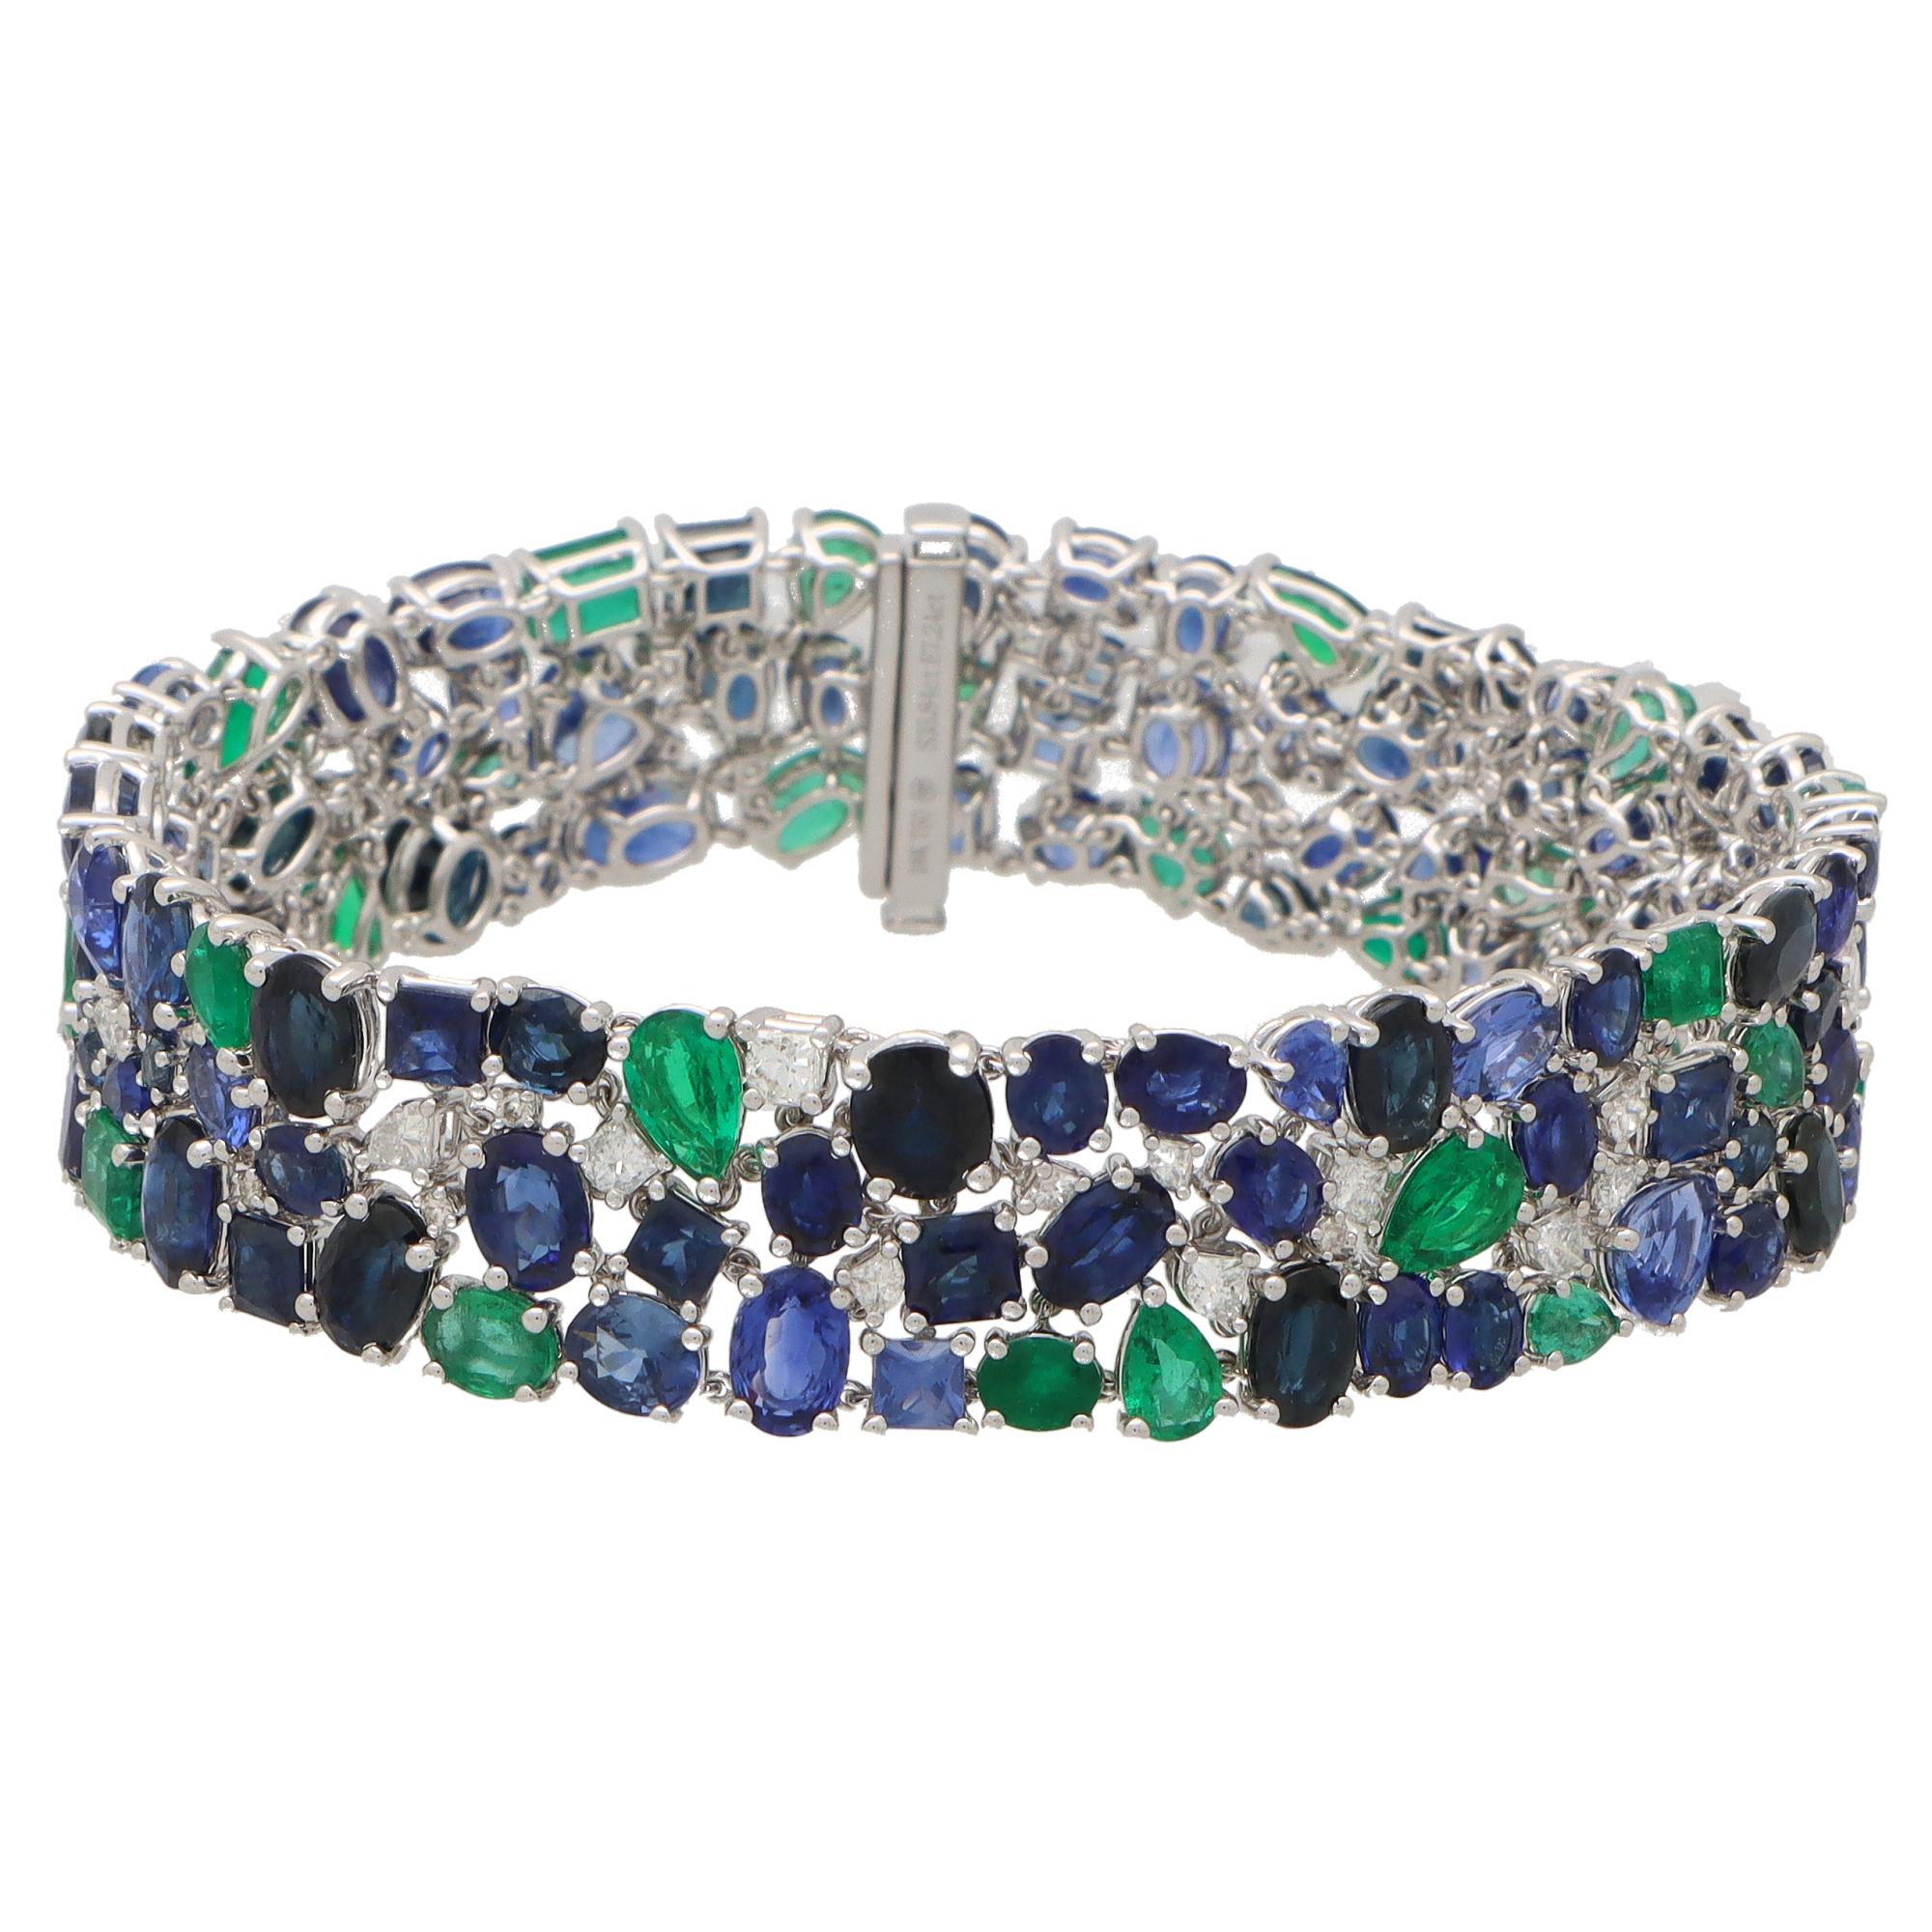 Mixed Cut Contemporary Blue Sapphire, Emerald and Diamond Bracelet Set in 18k White Gold For Sale